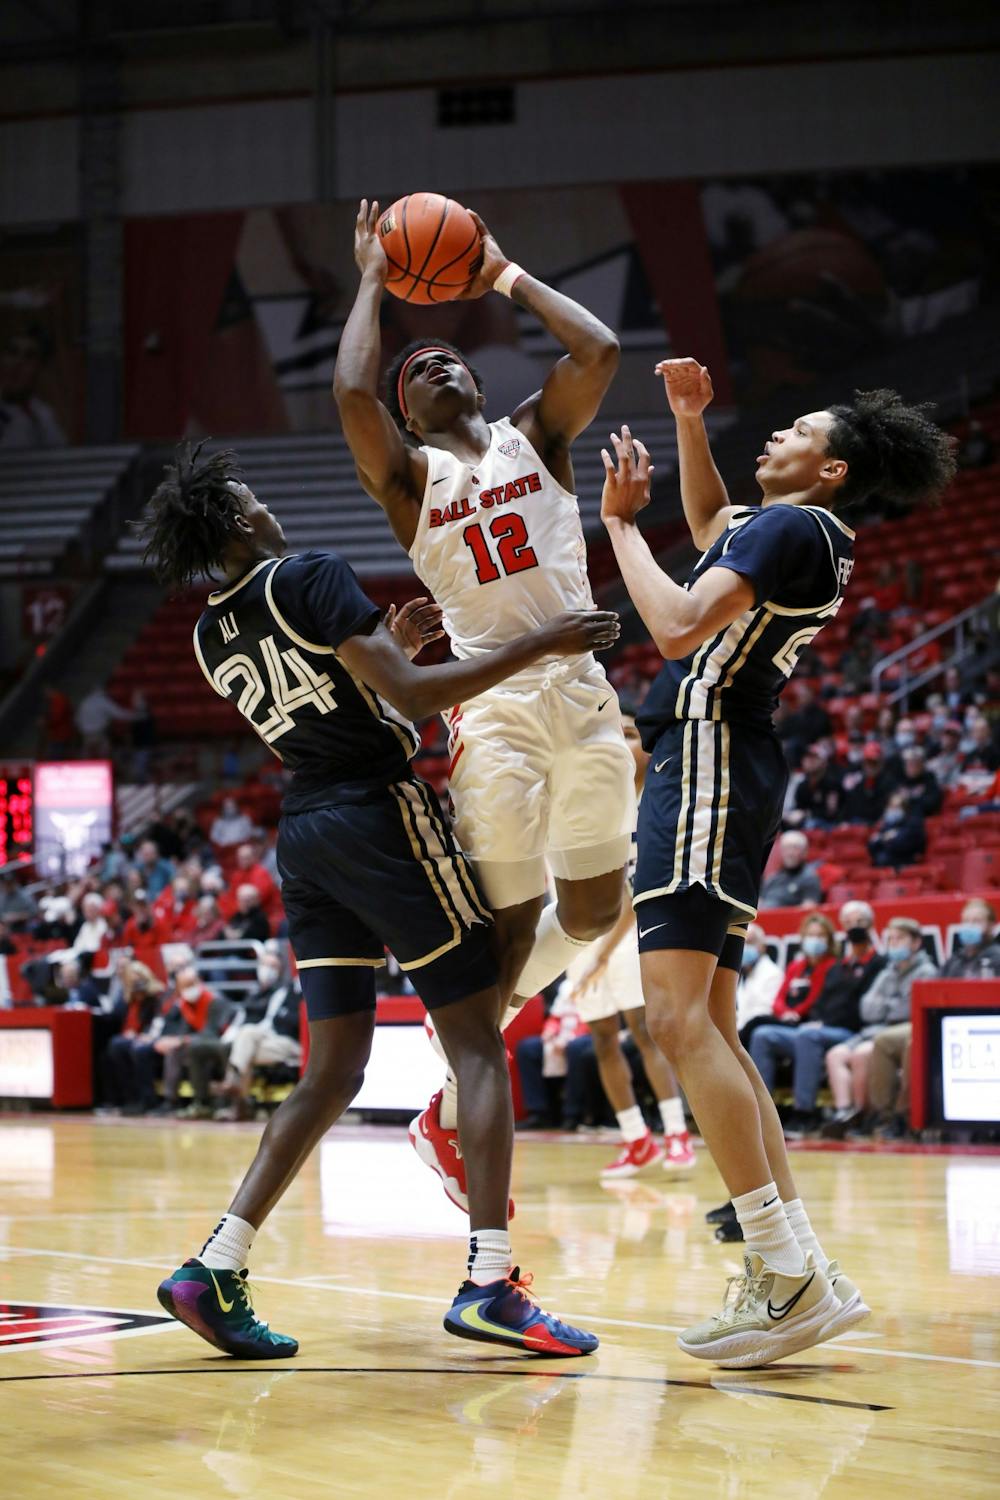 Four Takeaways from Ball State’s 86-72 victory over IU South Bend